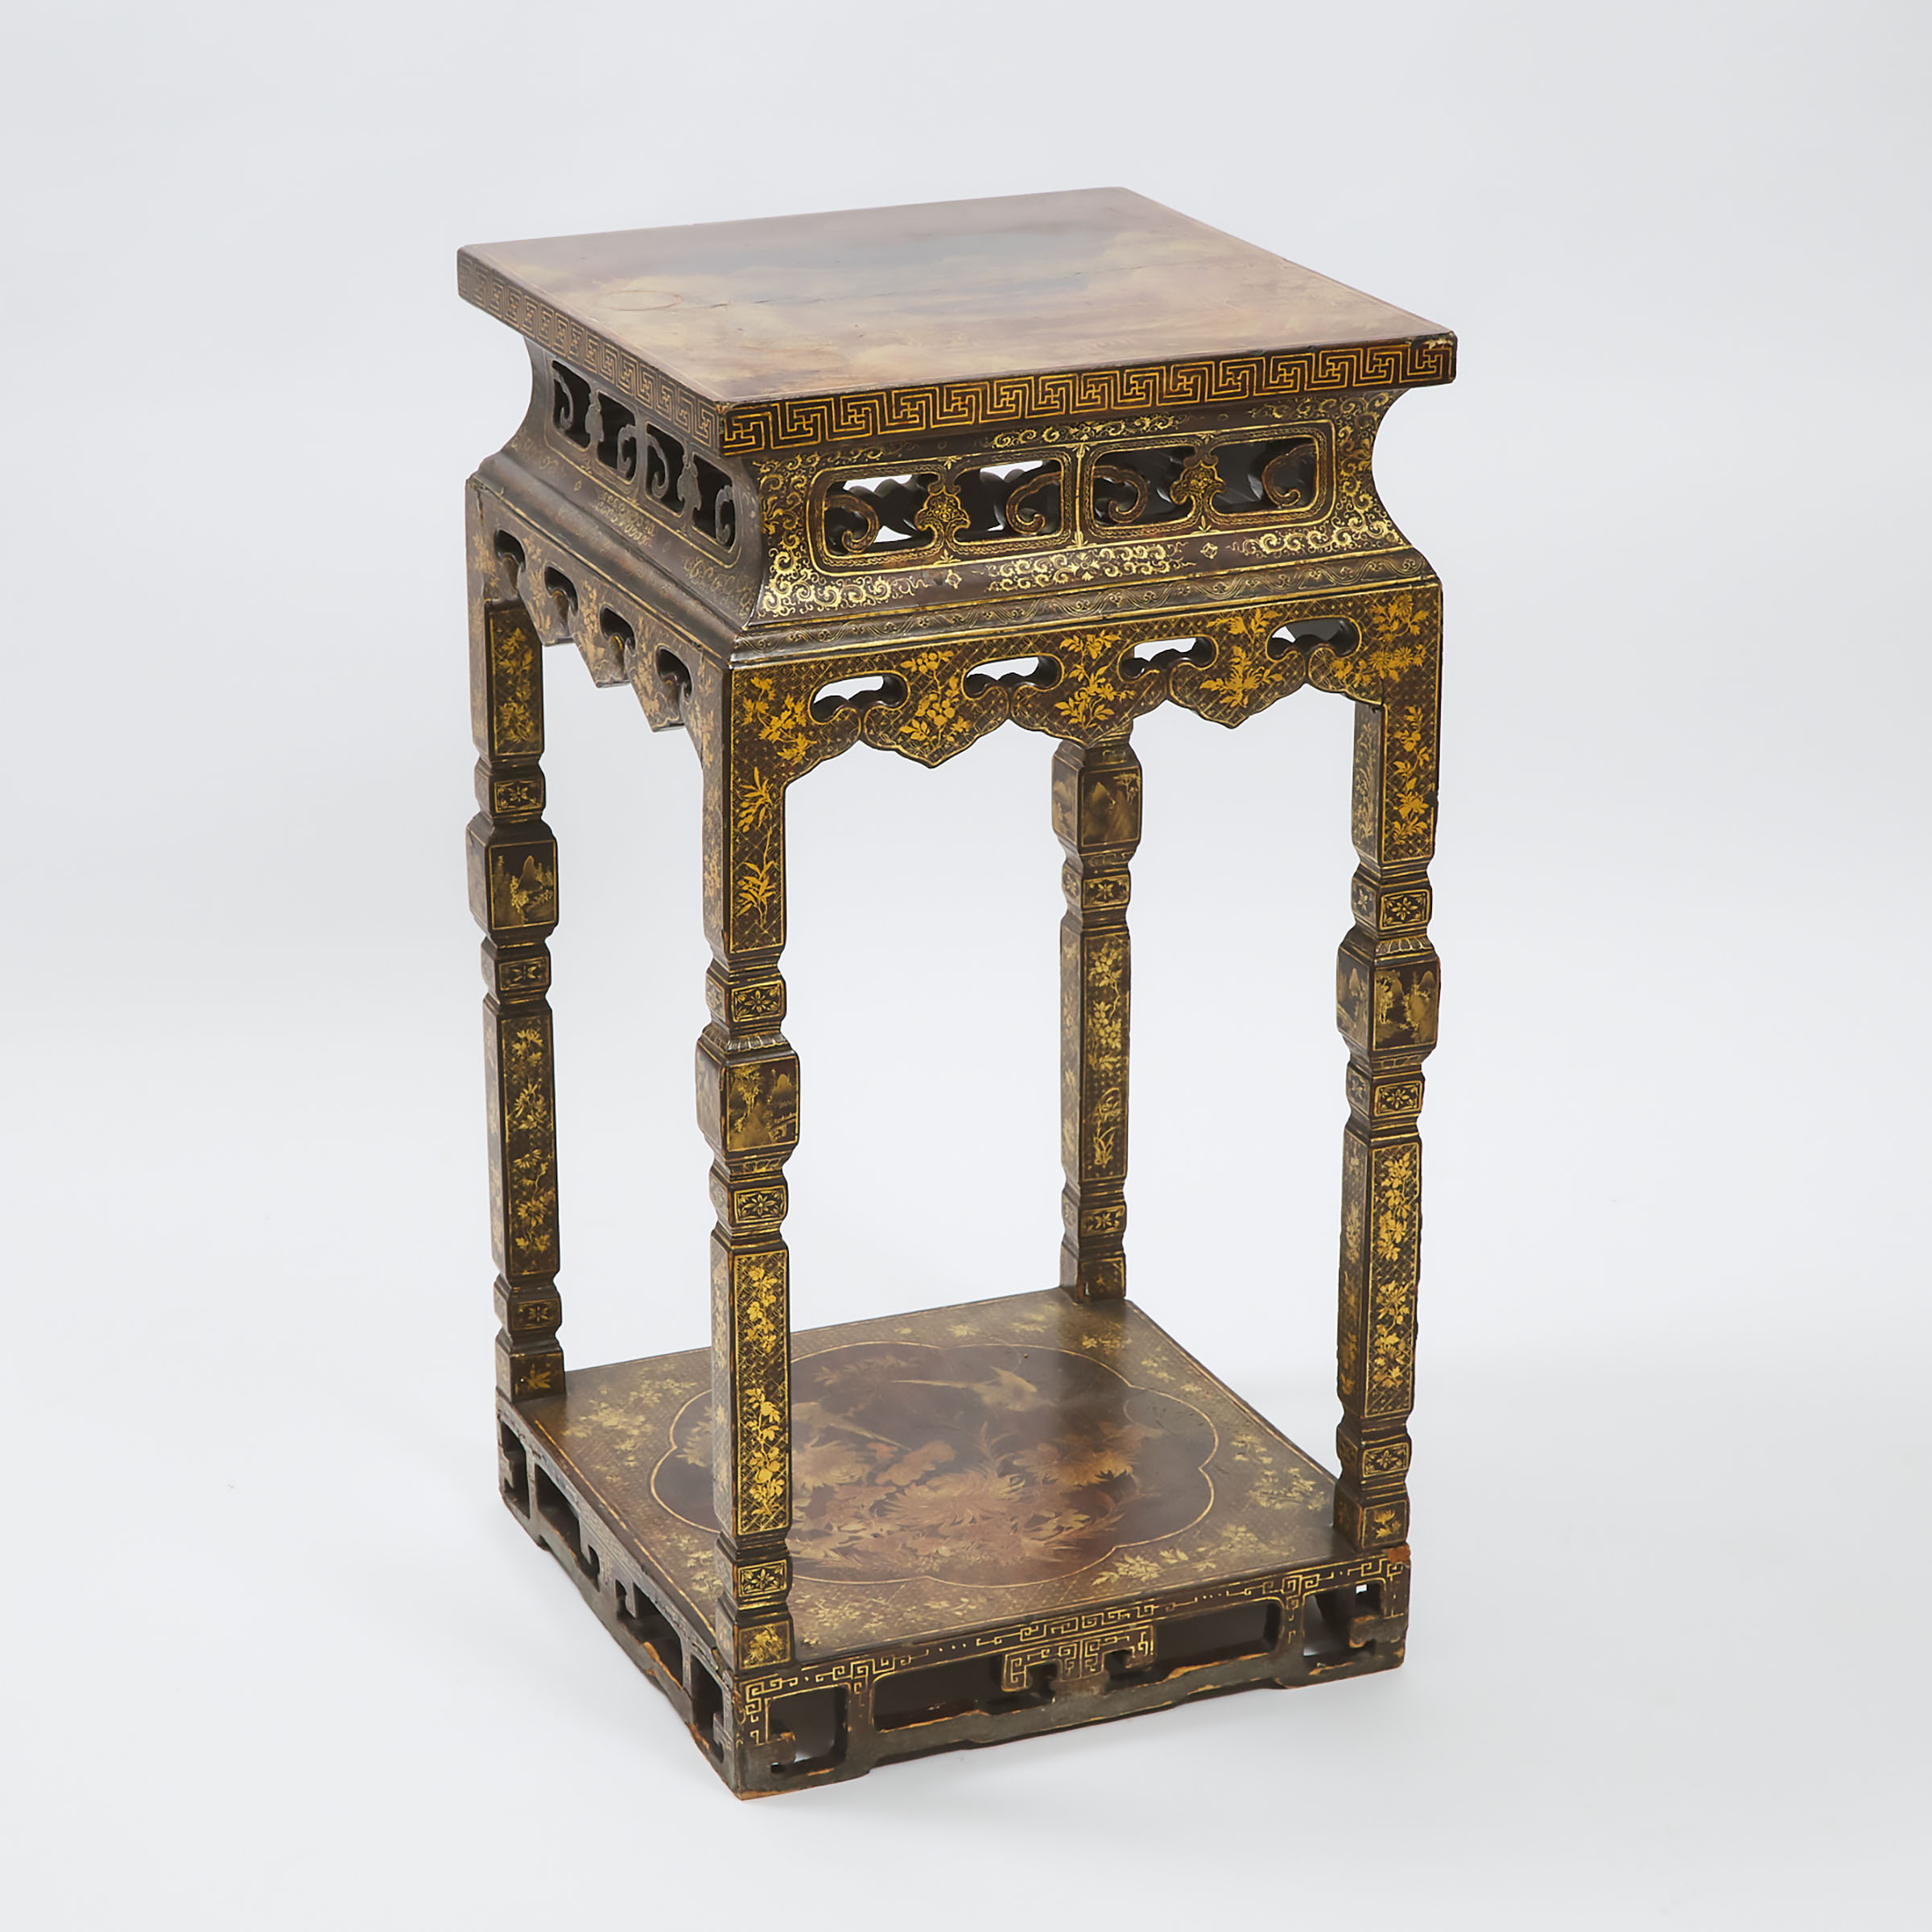 A Chinese Export Gilt Lacquer Stand, 19th Century